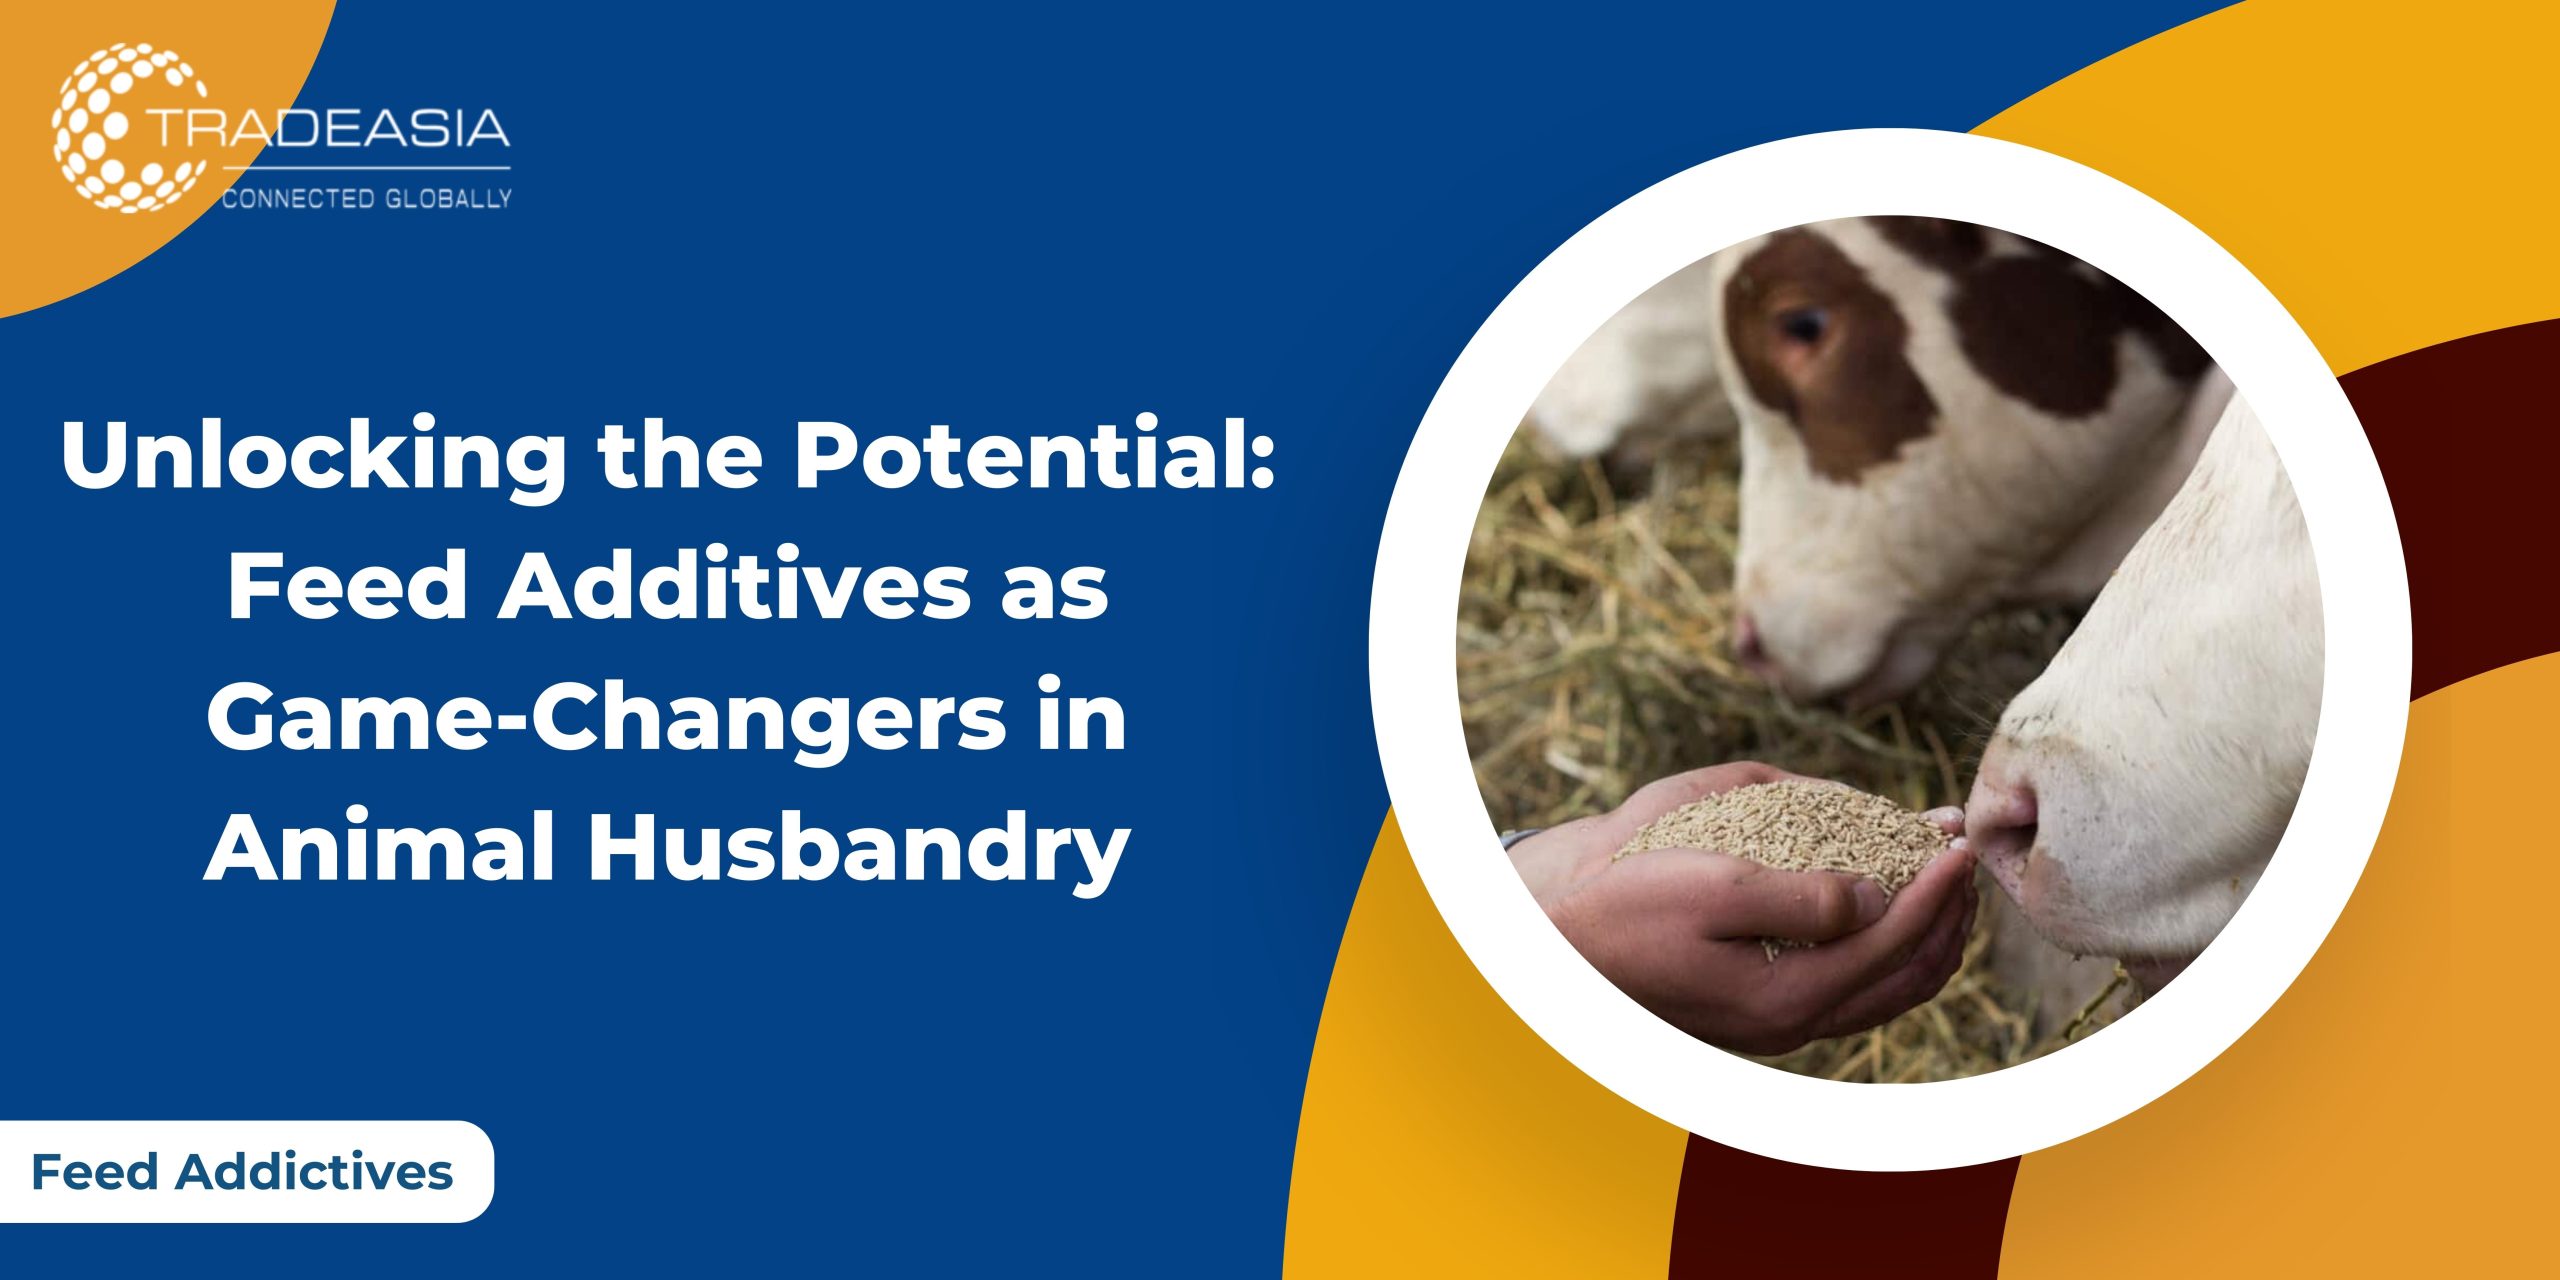 Unlocking the Potential: Feed Additives as Game-Changers in Animal Husbandry